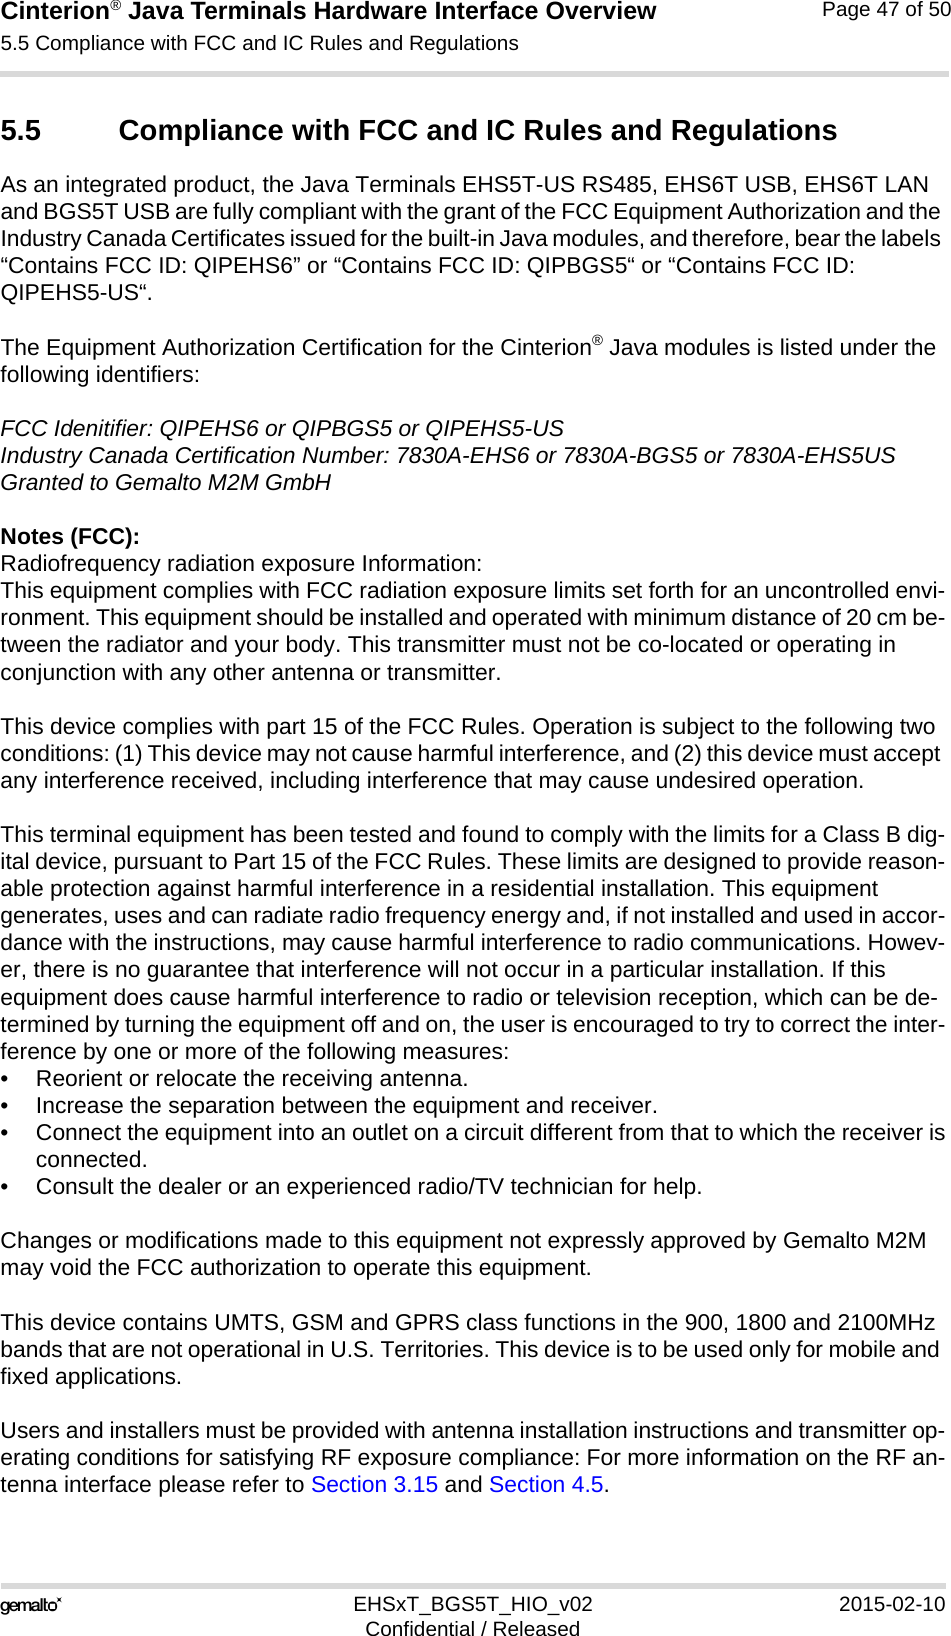 Cinterion® Java Terminals Hardware Interface Overview5.5 Compliance with FCC and IC Rules and Regulations48EHSxT_BGS5T_HIO_v02 2015-02-10Confidential / ReleasedPage 47 of 505.5 Compliance with FCC and IC Rules and RegulationsAs an integrated product, the Java Terminals EHS5T-US RS485, EHS6T USB, EHS6T LAN and BGS5T USB are fully compliant with the grant of the FCC Equipment Authorization and the Industry Canada Certificates issued for the built-in Java modules, and therefore, bear the labels “Contains FCC ID: QIPEHS6” or “Contains FCC ID: QIPBGS5“ or “Contains FCC ID: QIPEHS5-US“.The Equipment Authorization Certification for the Cinterion® Java modules is listed under the following identifiers:FCC Idenitifier: QIPEHS6 or QIPBGS5 or QIPEHS5-USIndustry Canada Certification Number: 7830A-EHS6 or 7830A-BGS5 or 7830A-EHS5USGranted to Gemalto M2M GmbHNotes (FCC): Radiofrequency radiation exposure Information:This equipment complies with FCC radiation exposure limits set forth for an uncontrolled envi-ronment. This equipment should be installed and operated with minimum distance of 20 cm be-tween the radiator and your body. This transmitter must not be co-located or operating in conjunction with any other antenna or transmitter.This device complies with part 15 of the FCC Rules. Operation is subject to the following two conditions: (1) This device may not cause harmful interference, and (2) this device must accept any interference received, including interference that may cause undesired operation.This terminal equipment has been tested and found to comply with the limits for a Class B dig-ital device, pursuant to Part 15 of the FCC Rules. These limits are designed to provide reason-able protection against harmful interference in a residential installation. This equipment generates, uses and can radiate radio frequency energy and, if not installed and used in accor-dance with the instructions, may cause harmful interference to radio communications. Howev-er, there is no guarantee that interference will not occur in a particular installation. If this equipment does cause harmful interference to radio or television reception, which can be de-termined by turning the equipment off and on, the user is encouraged to try to correct the inter-ference by one or more of the following measures:• Reorient or relocate the receiving antenna.• Increase the separation between the equipment and receiver.• Connect the equipment into an outlet on a circuit different from that to which the receiver isconnected.• Consult the dealer or an experienced radio/TV technician for help.Changes or modifications made to this equipment not expressly approved by Gemalto M2M may void the FCC authorization to operate this equipment. This device contains UMTS, GSM and GPRS class functions in the 900, 1800 and 2100MHz bands that are not operational in U.S. Territories. This device is to be used only for mobile and fixed applications.Users and installers must be provided with antenna installation instructions and transmitter op-erating conditions for satisfying RF exposure compliance: For more information on the RF an-tenna interface please refer to Section 3.15 and Section 4.5.